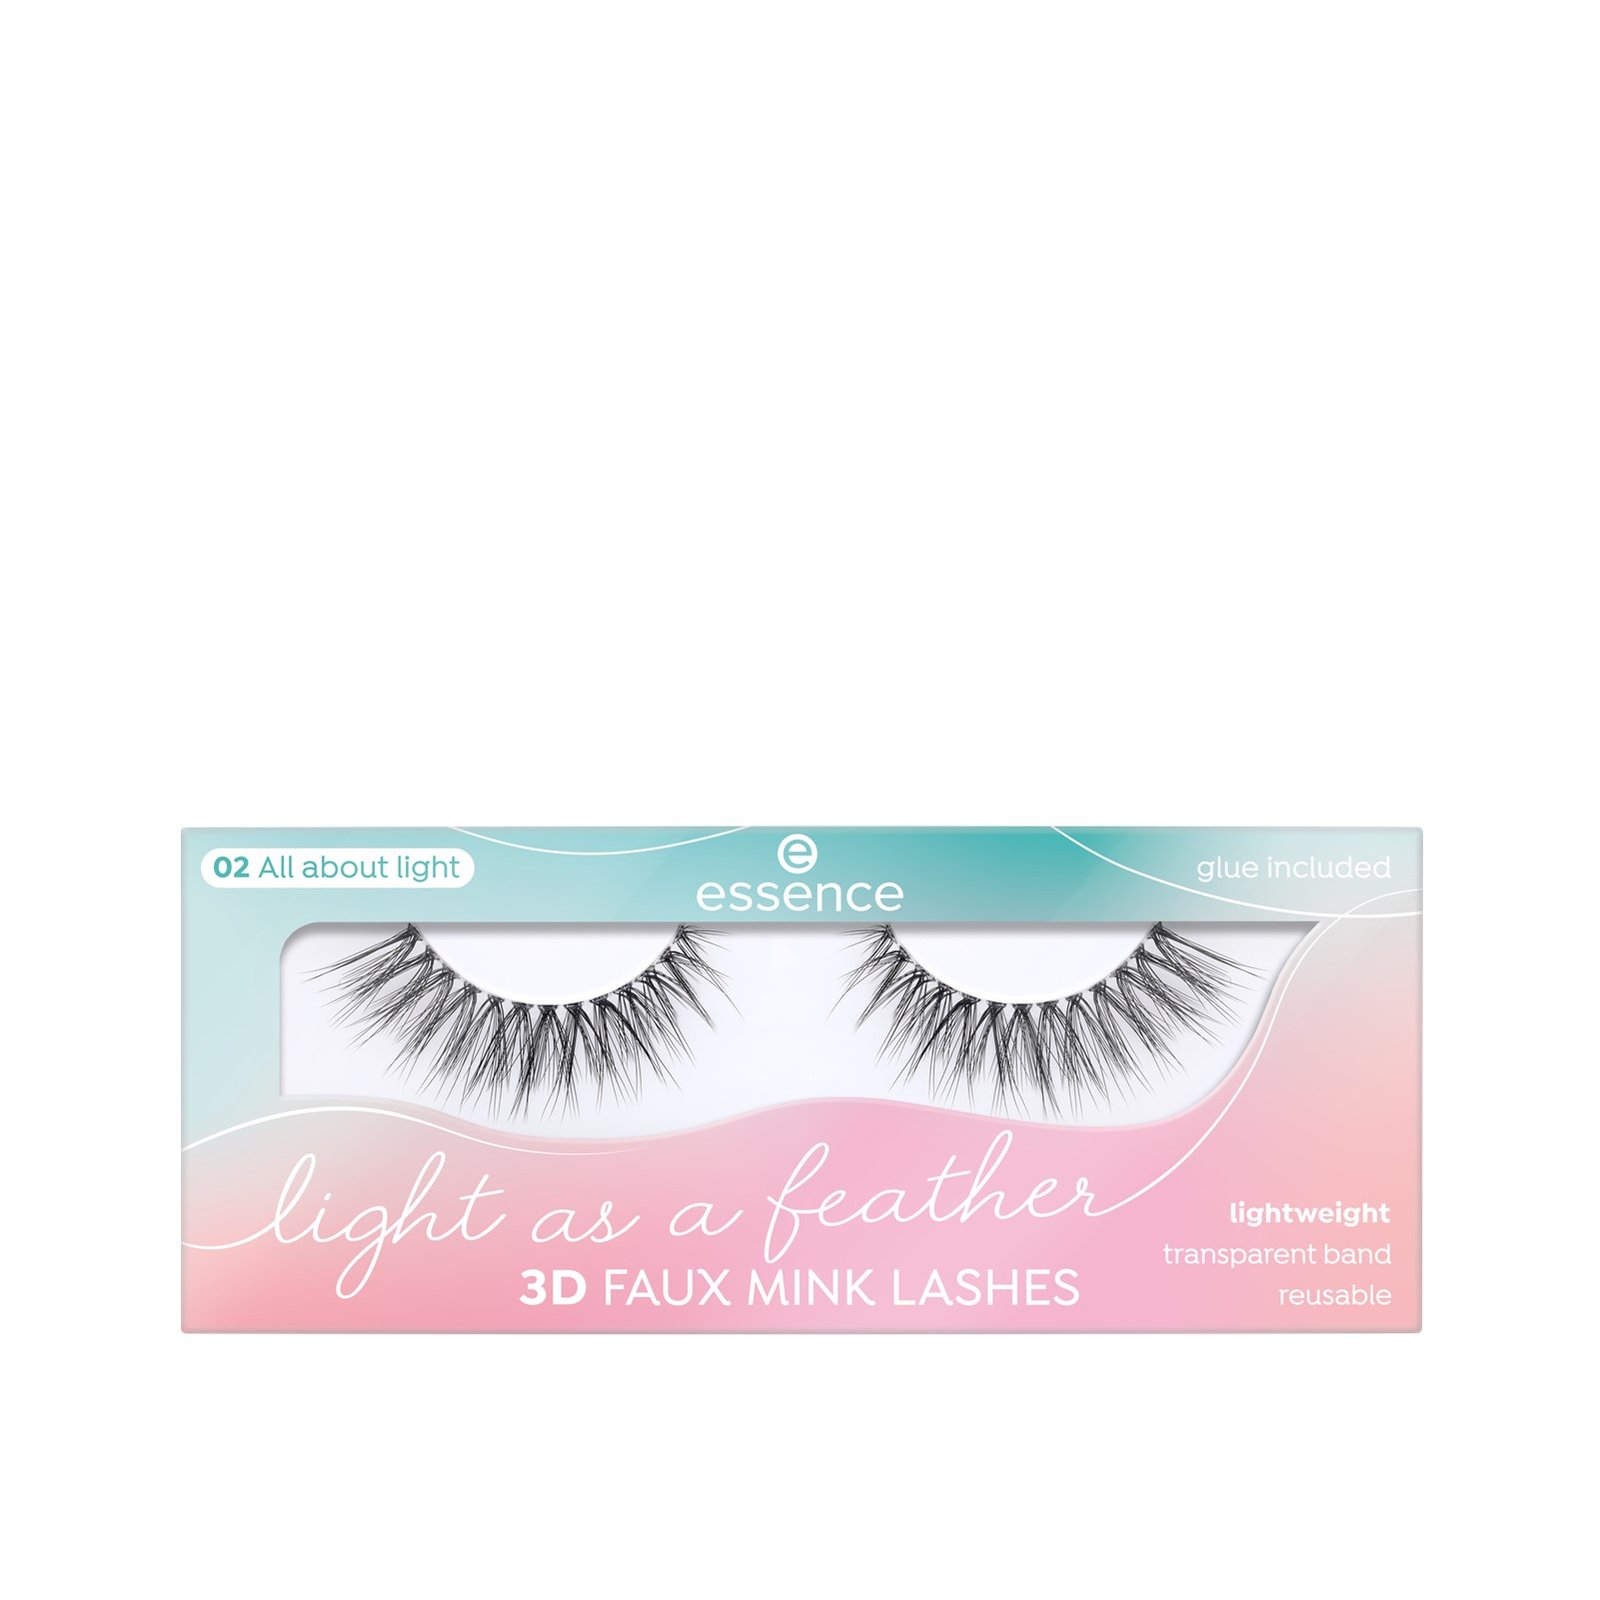 Buy essence Light As A · Feather About Faux All 3D Lashes USA Light Mink 02